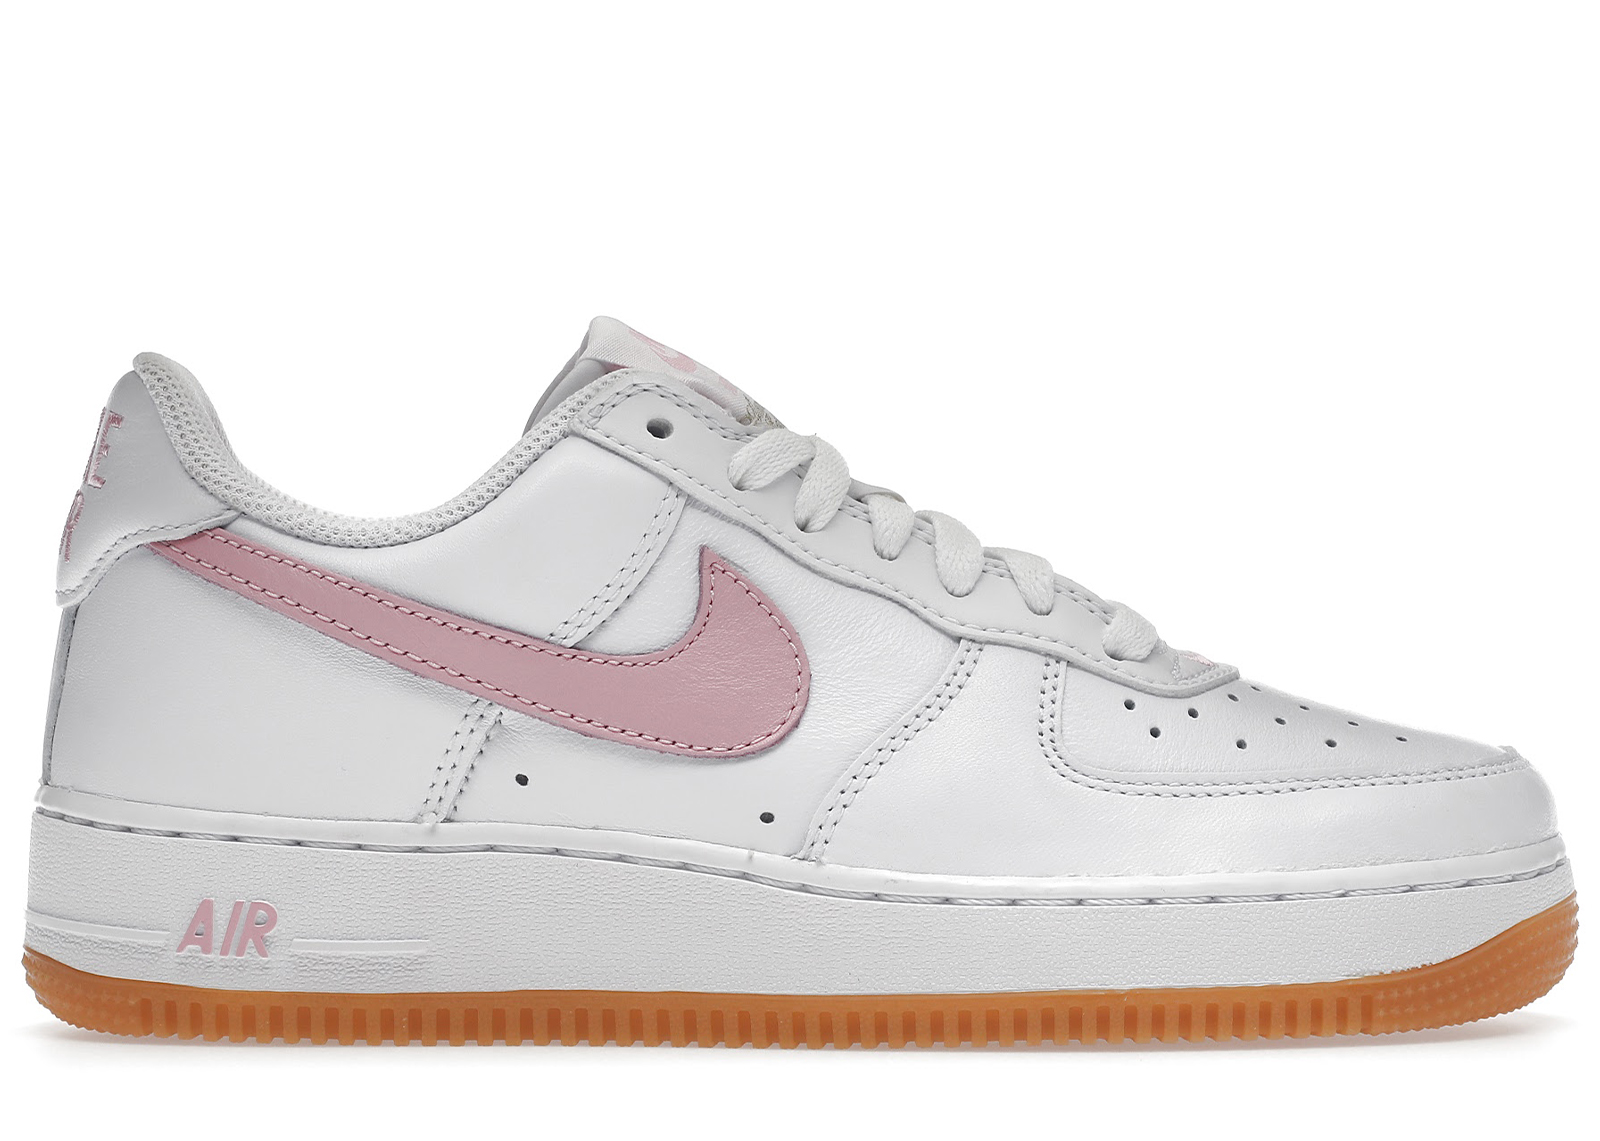 Nike Air Force 1 Low '07 Retro Color of the Month Pink Gum Men's 